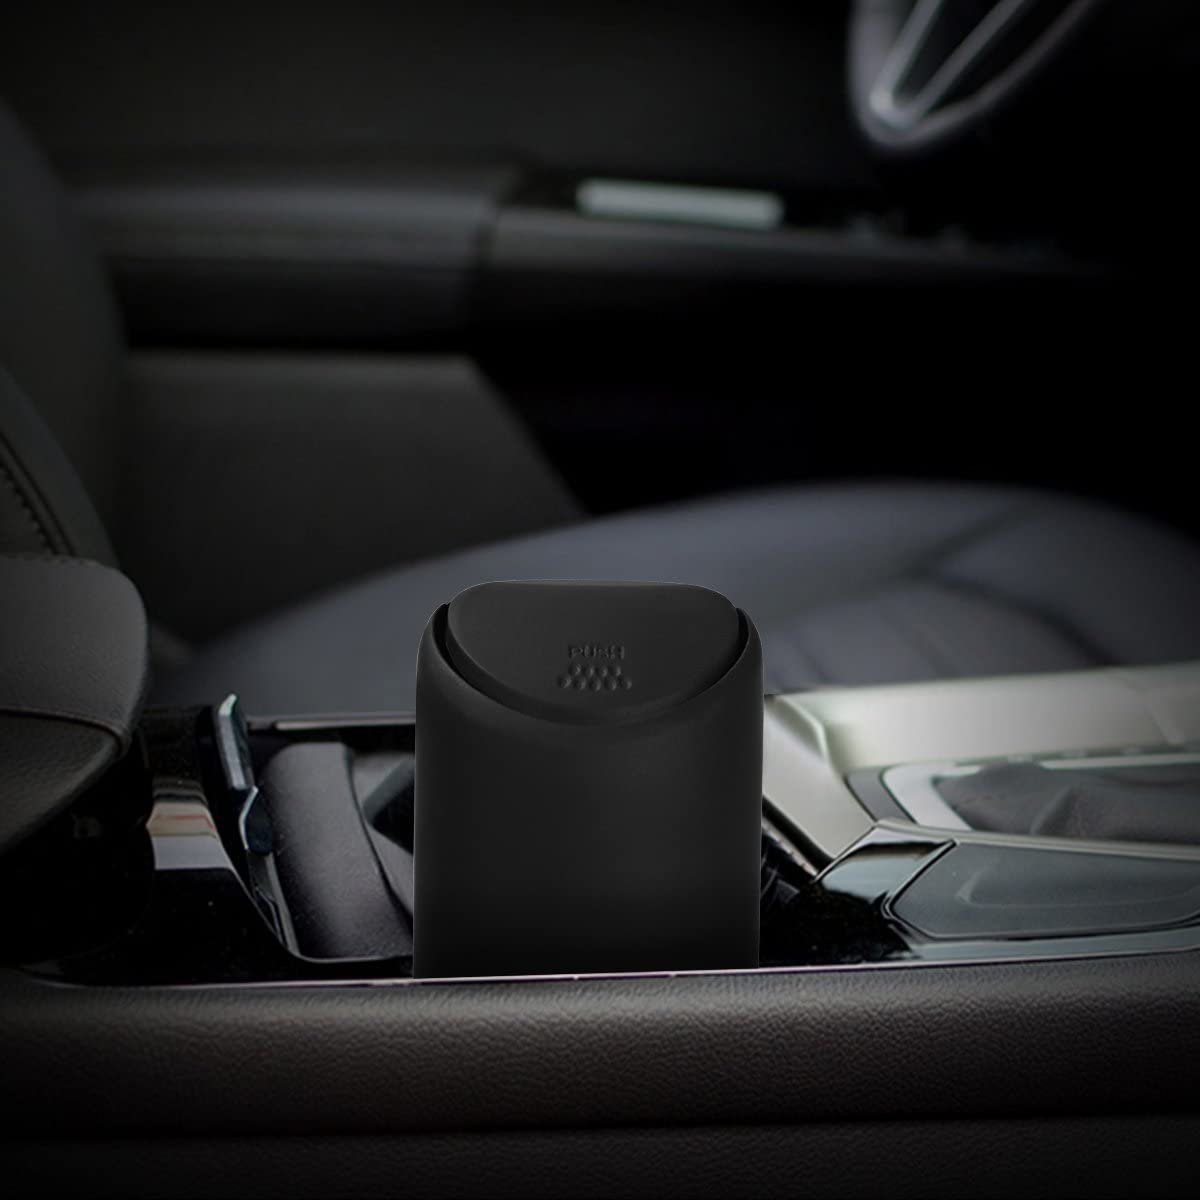 Silicone Trash Garbage Can bin use for Auto Vehicle Car Home Office (Black) Image 